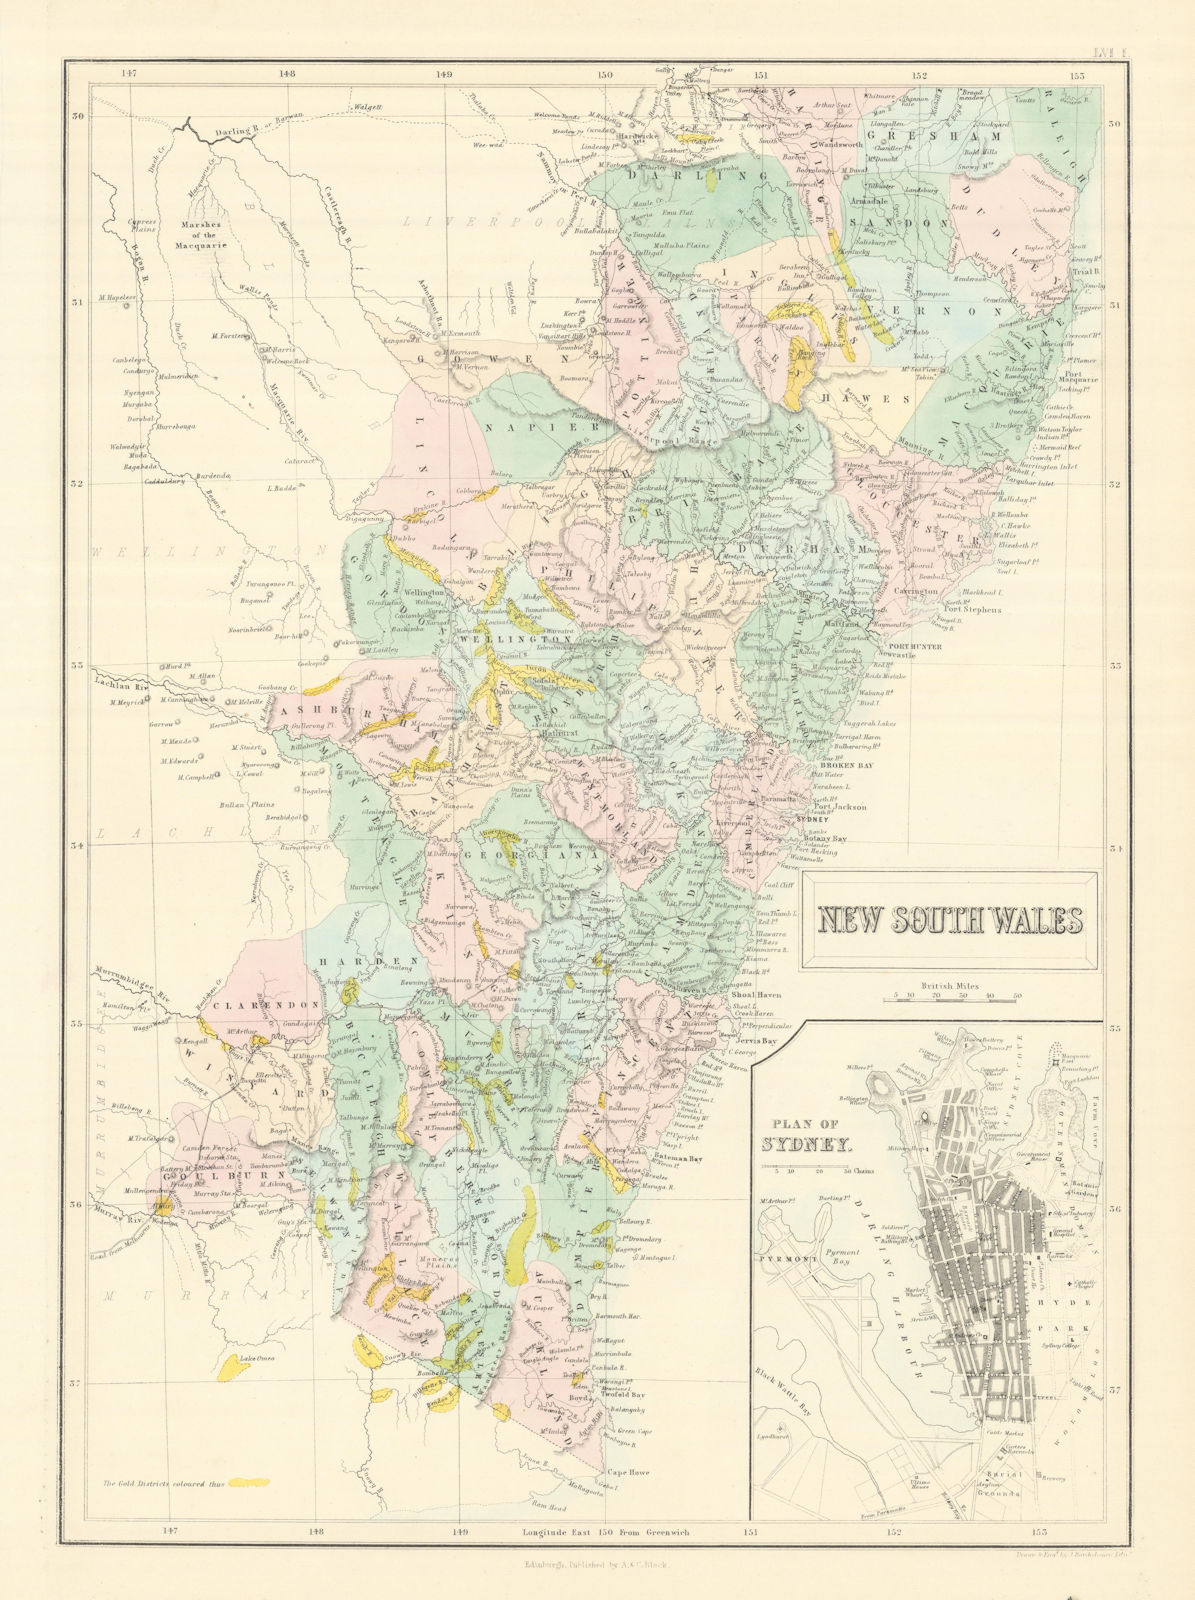 New South Wales showing gold rush districts. Inset Sydney city plan 1854 map